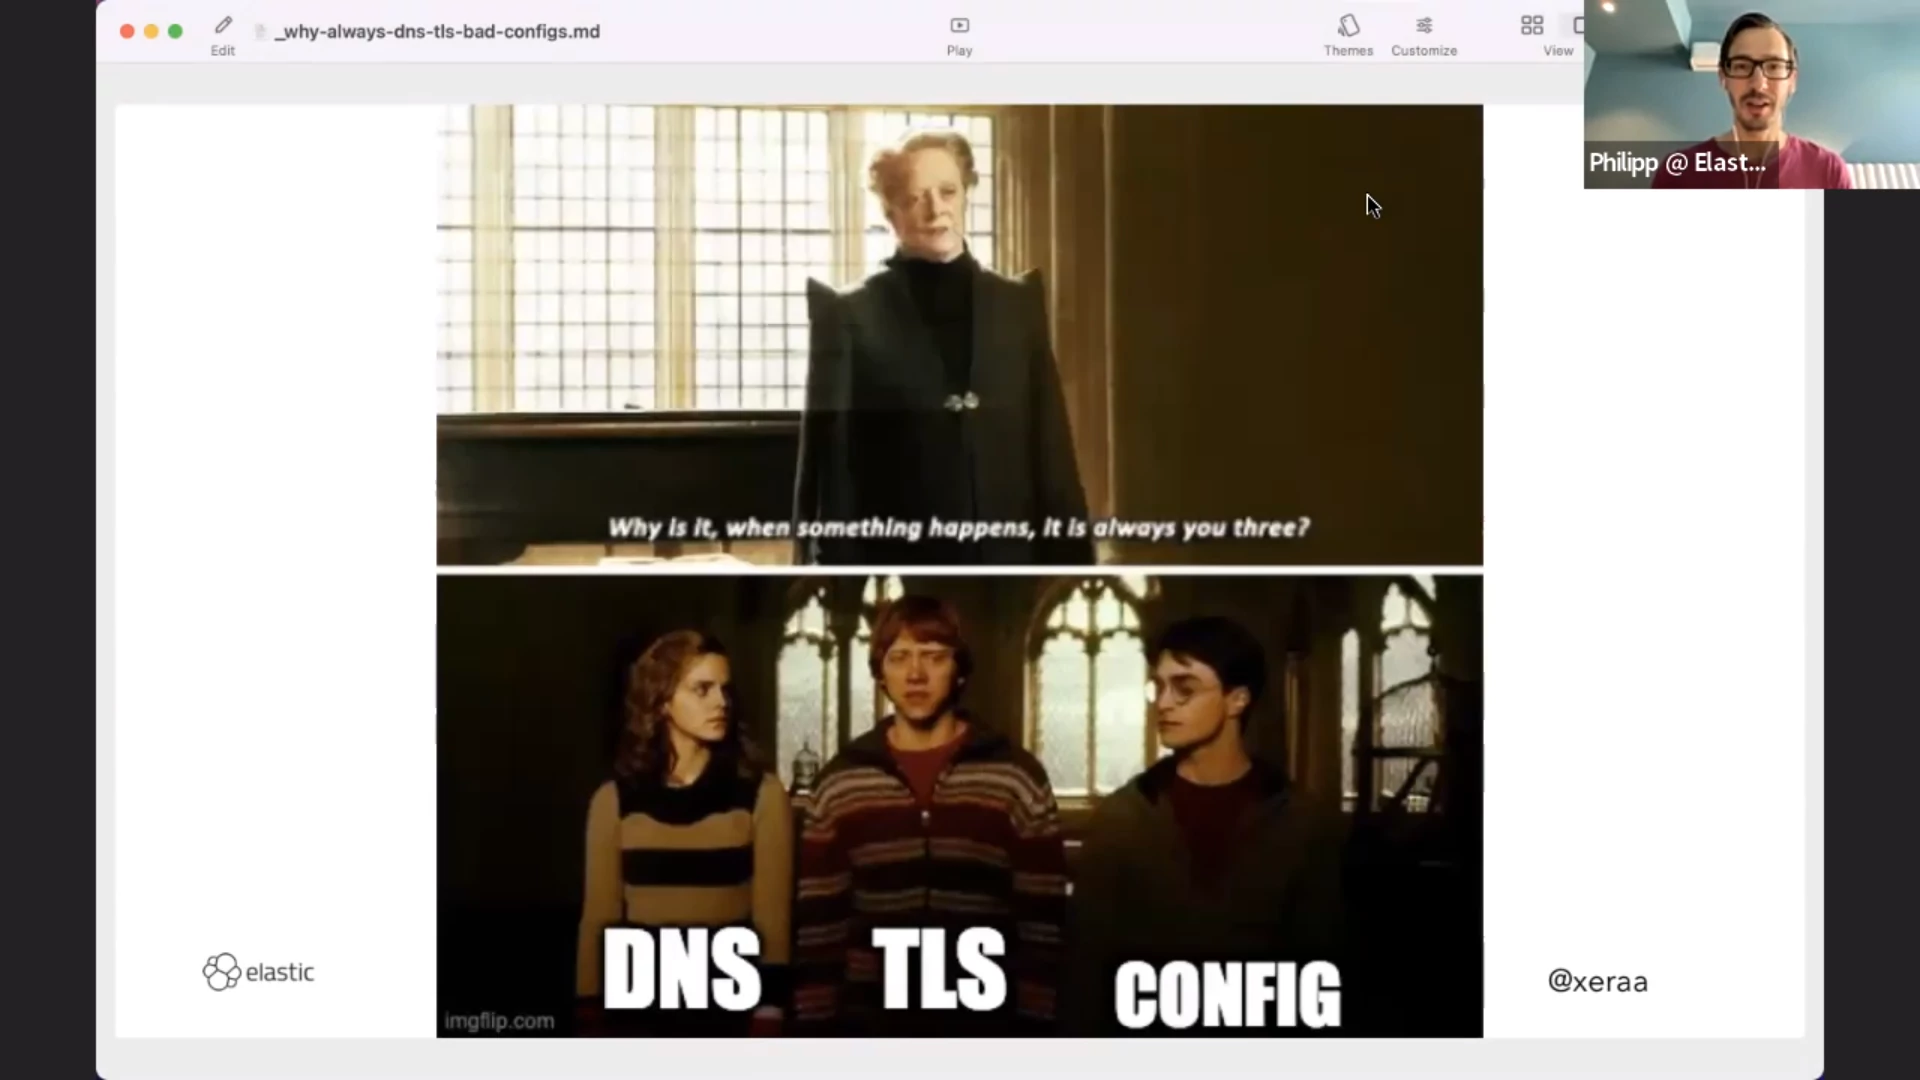 Philipp Krenn compares DNS, TLS and bad config with the three main characters in the Harry Potter series: when something bad happens, at least one of them is always involved